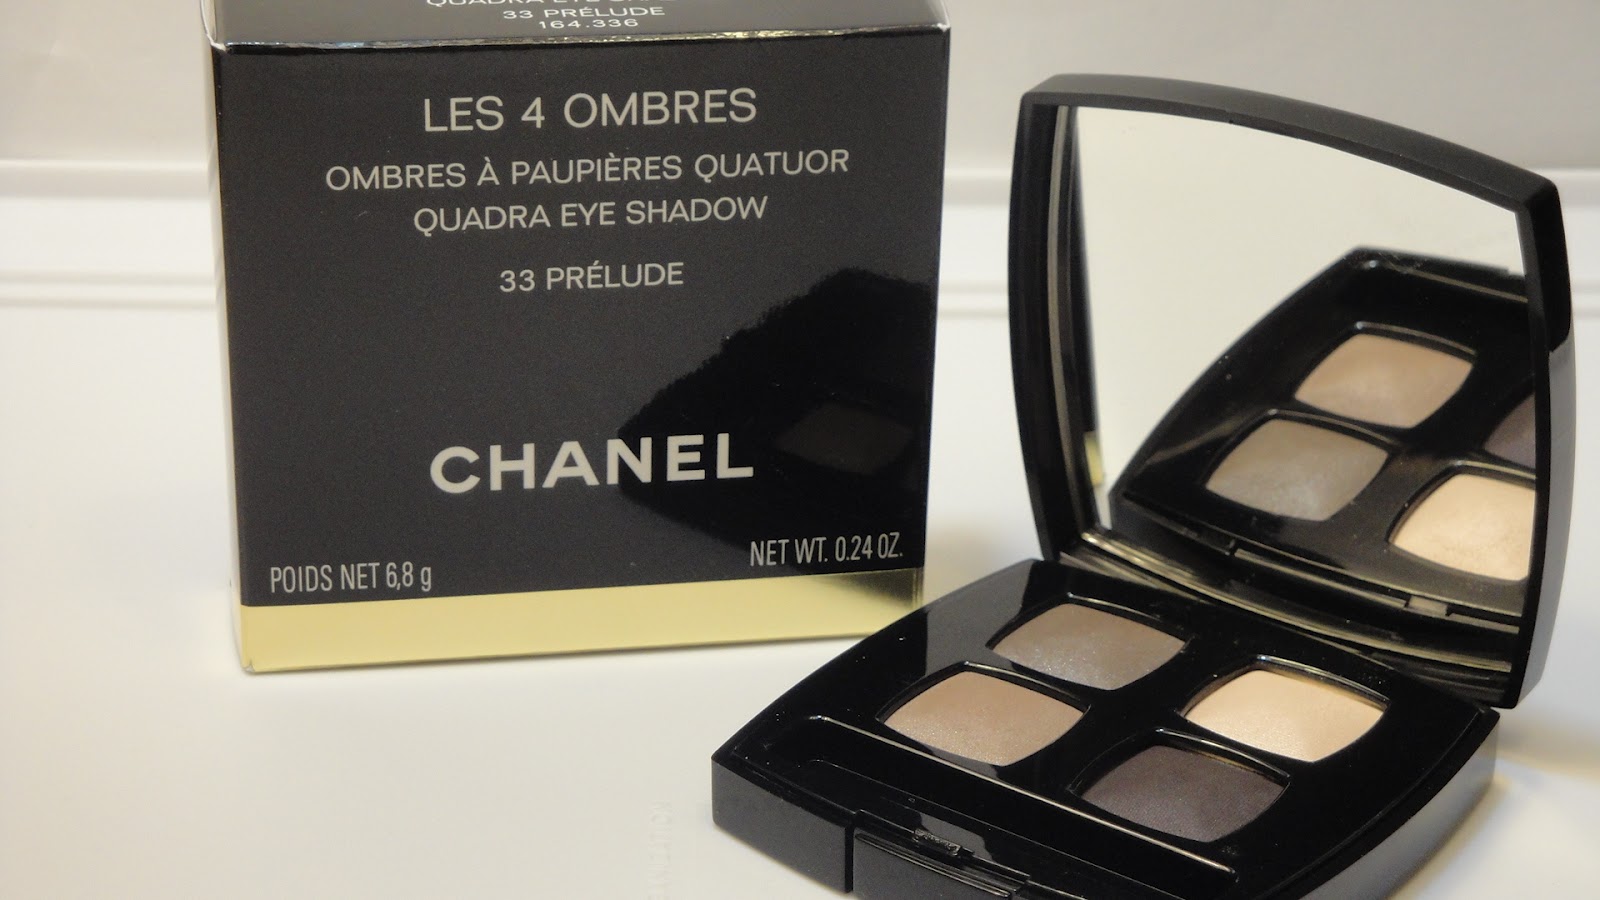 Jayded Dreaming Beauty Blog : 33 PRELUDE CHANEL LES 4 OMBRES QUADRA  EYESHADOW - SWATCHES AND REVIEW